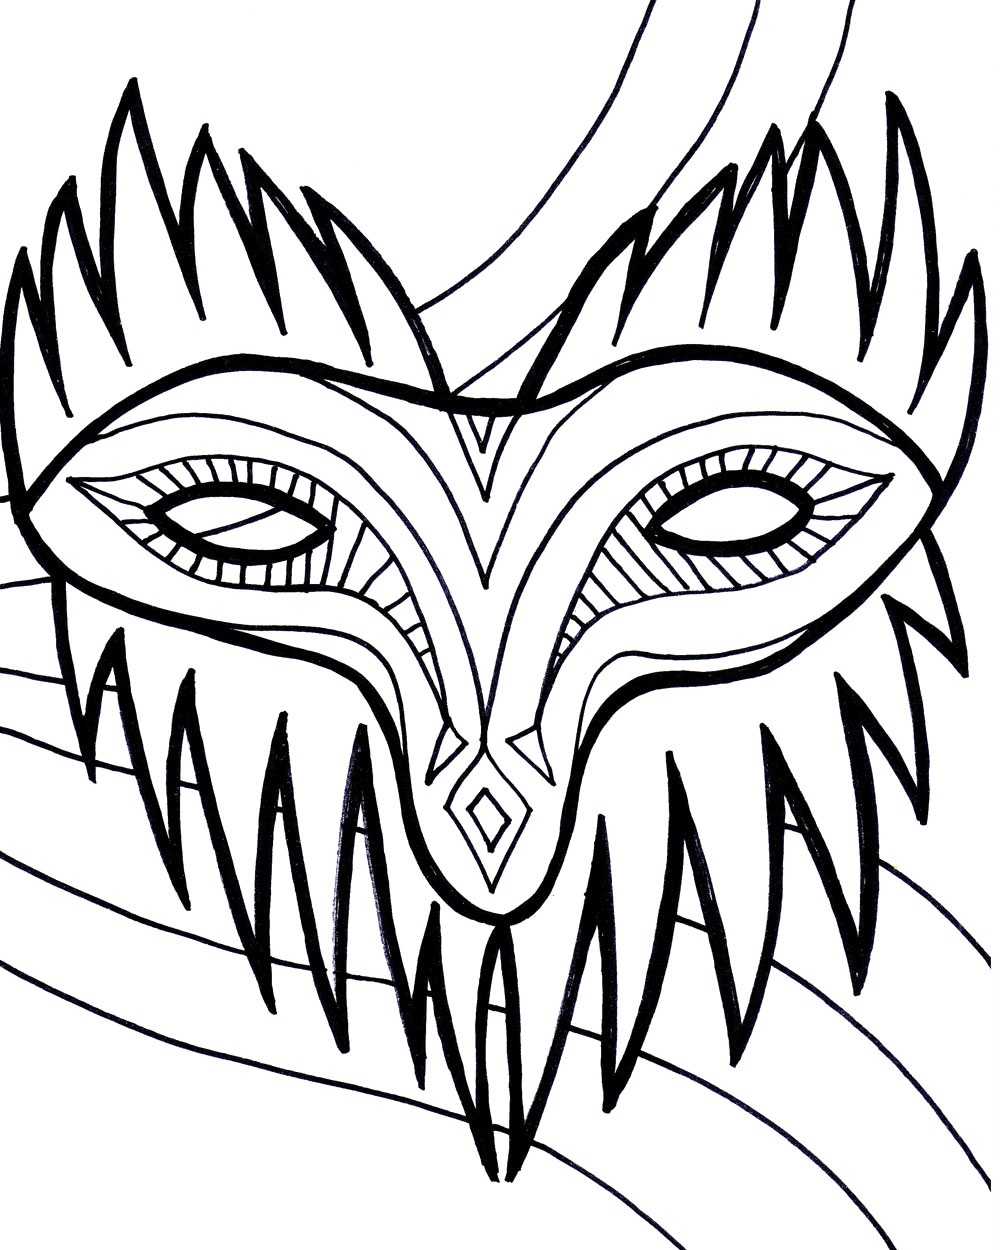 free-printable-mardi-gras-coloring-pages